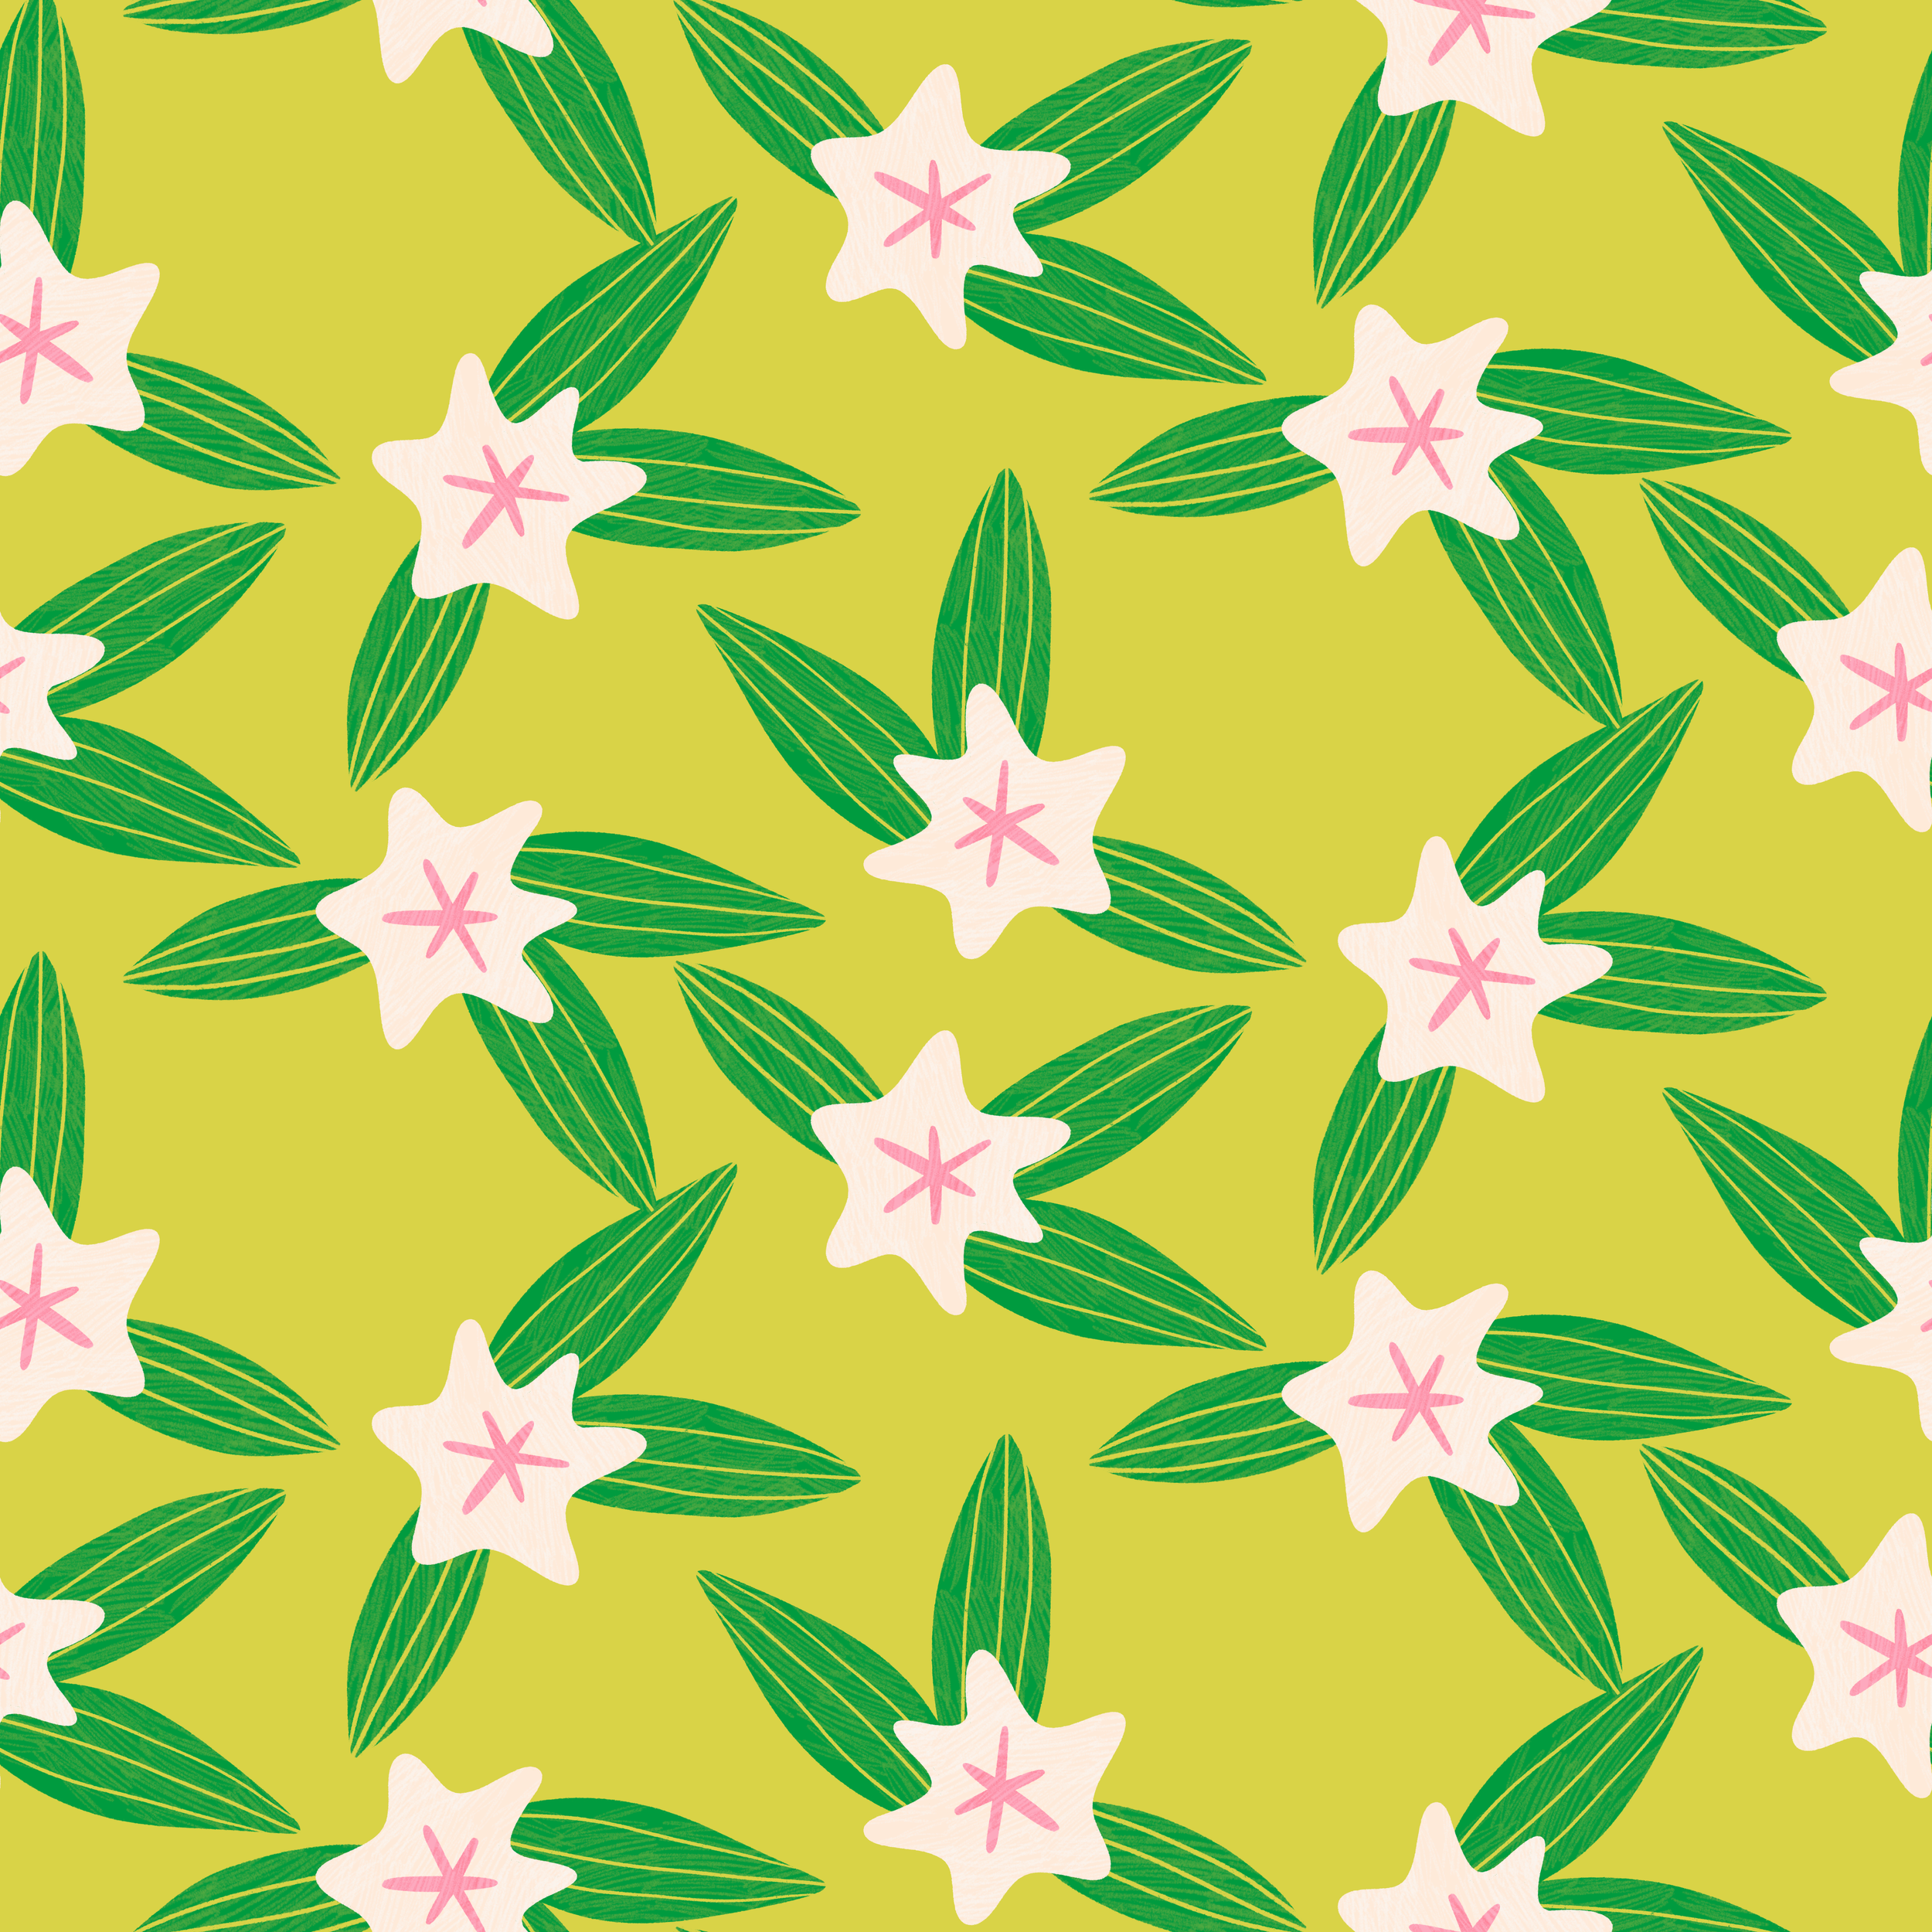 STAR FLOWERS 2.png